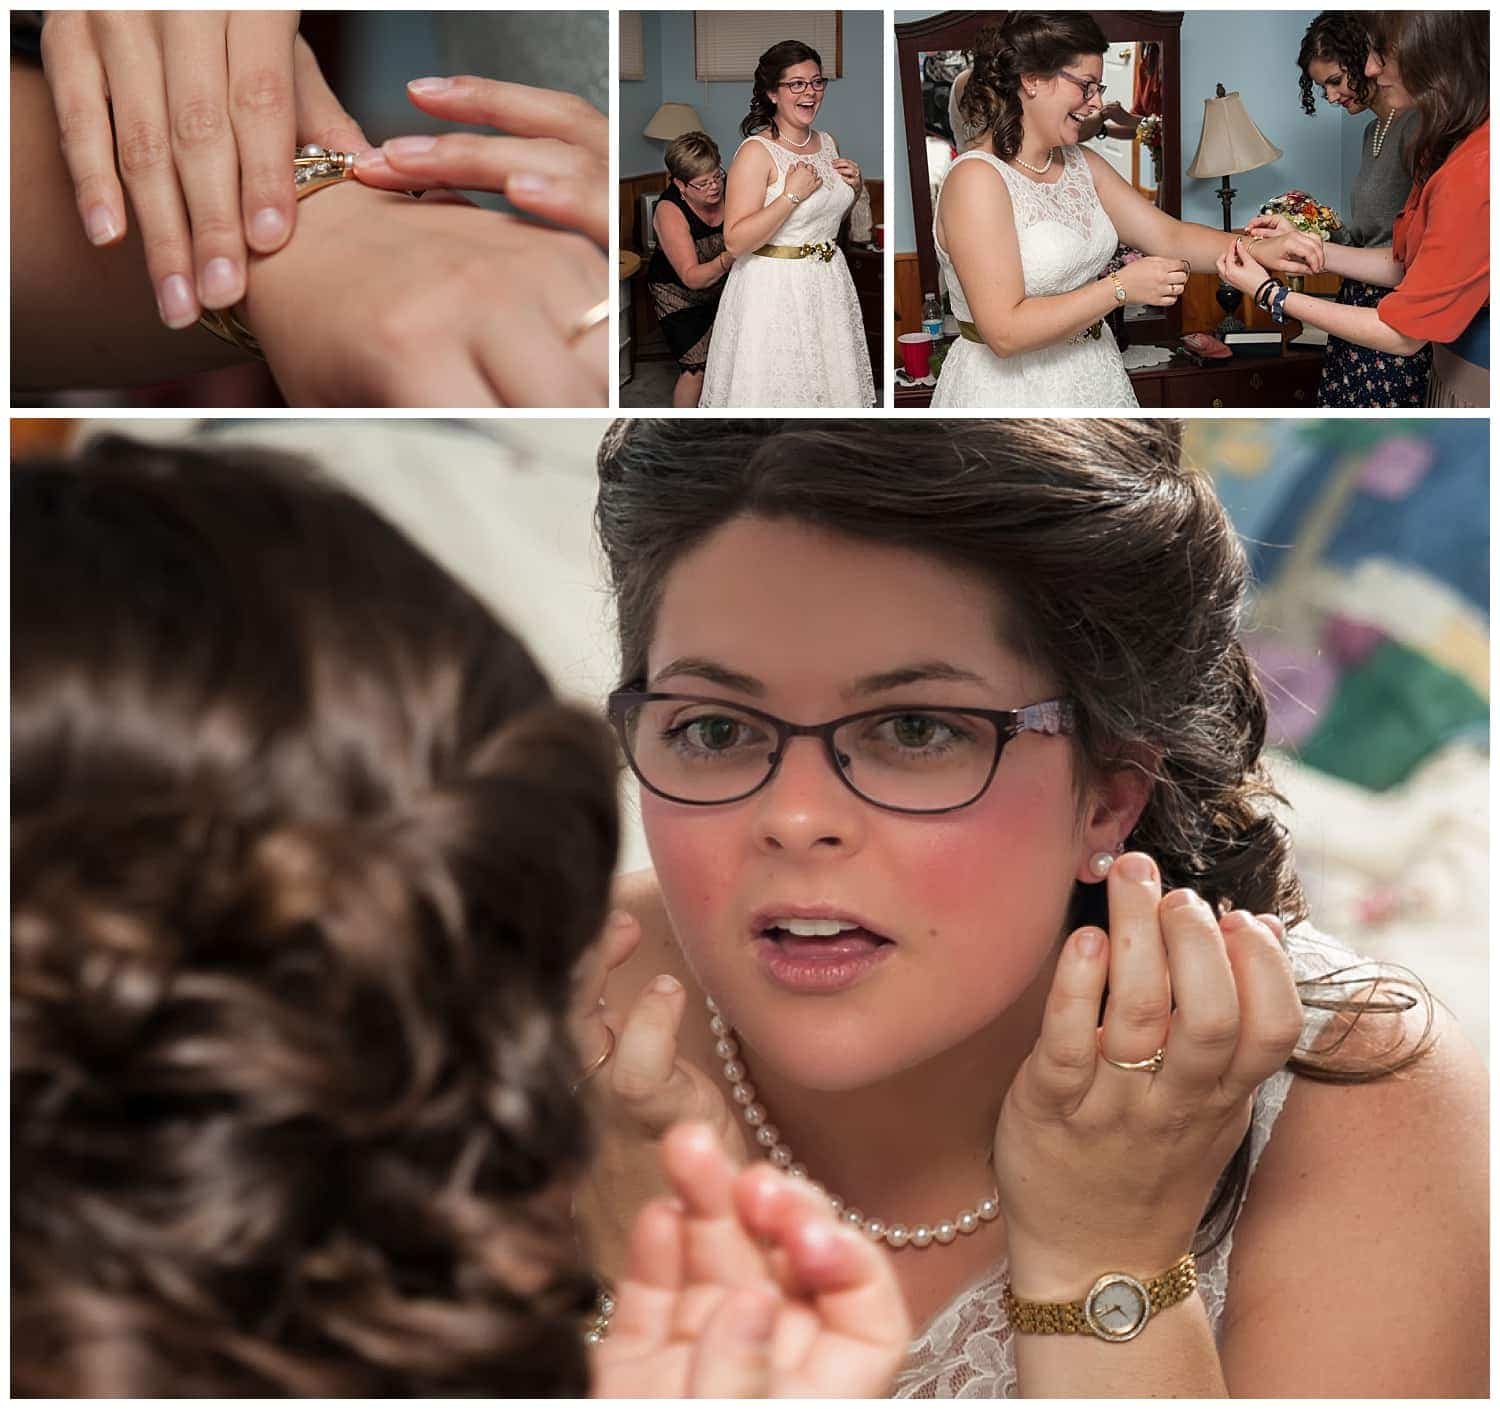 The bride with her bestfriends during bridal prep on her wedding day.